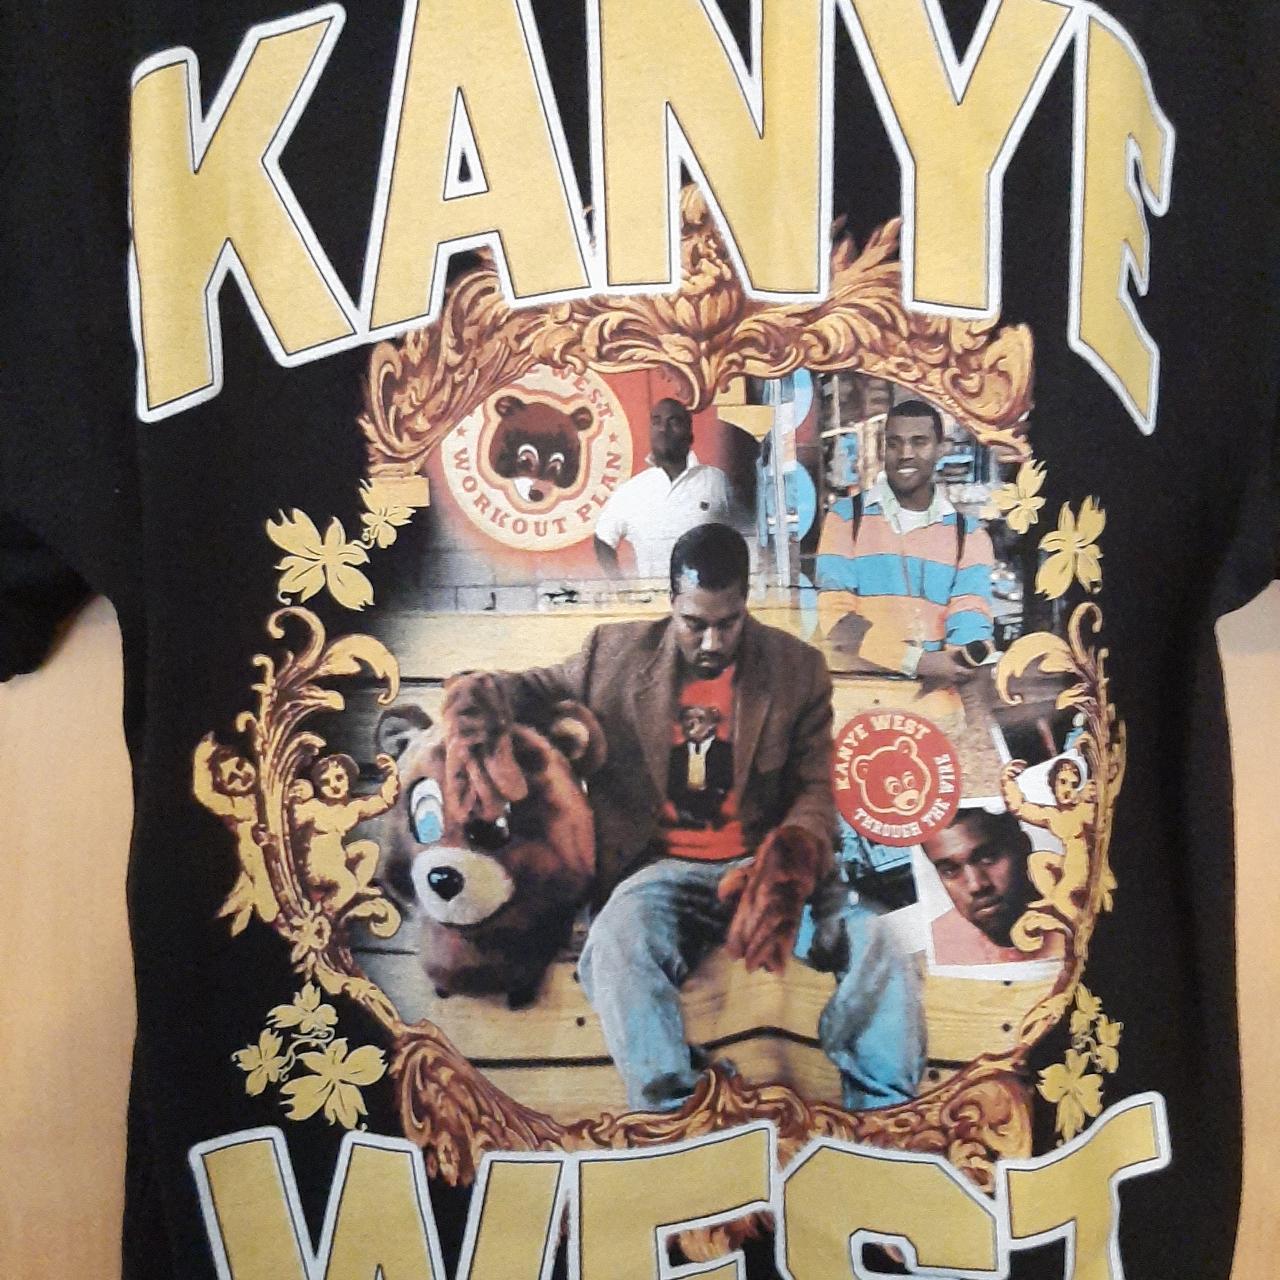 THE COLLEGE DROPOUT KANYE WEST VERY RARE VINTAGE - Depop